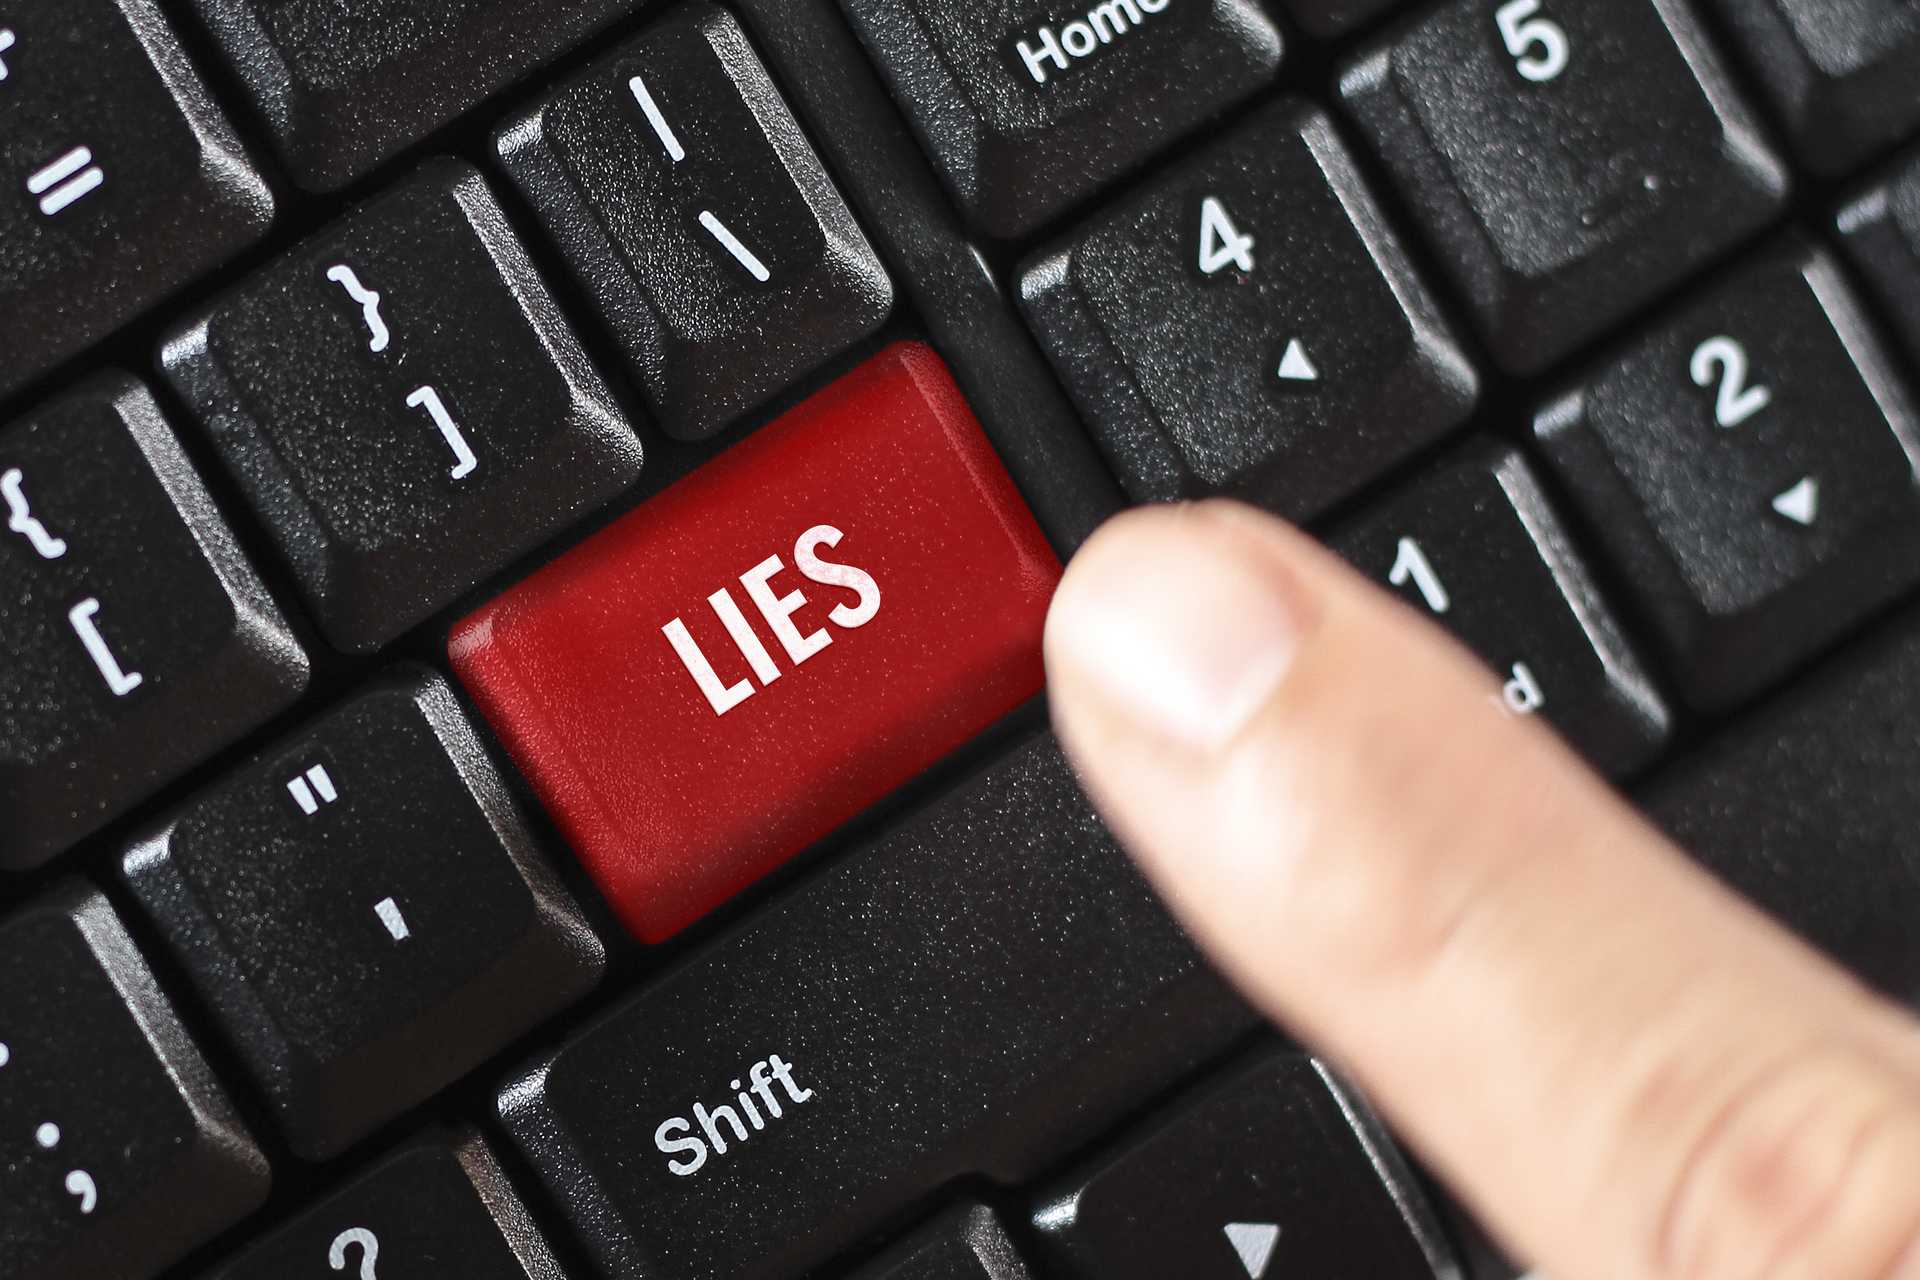 10% of us is demonstrably lying online